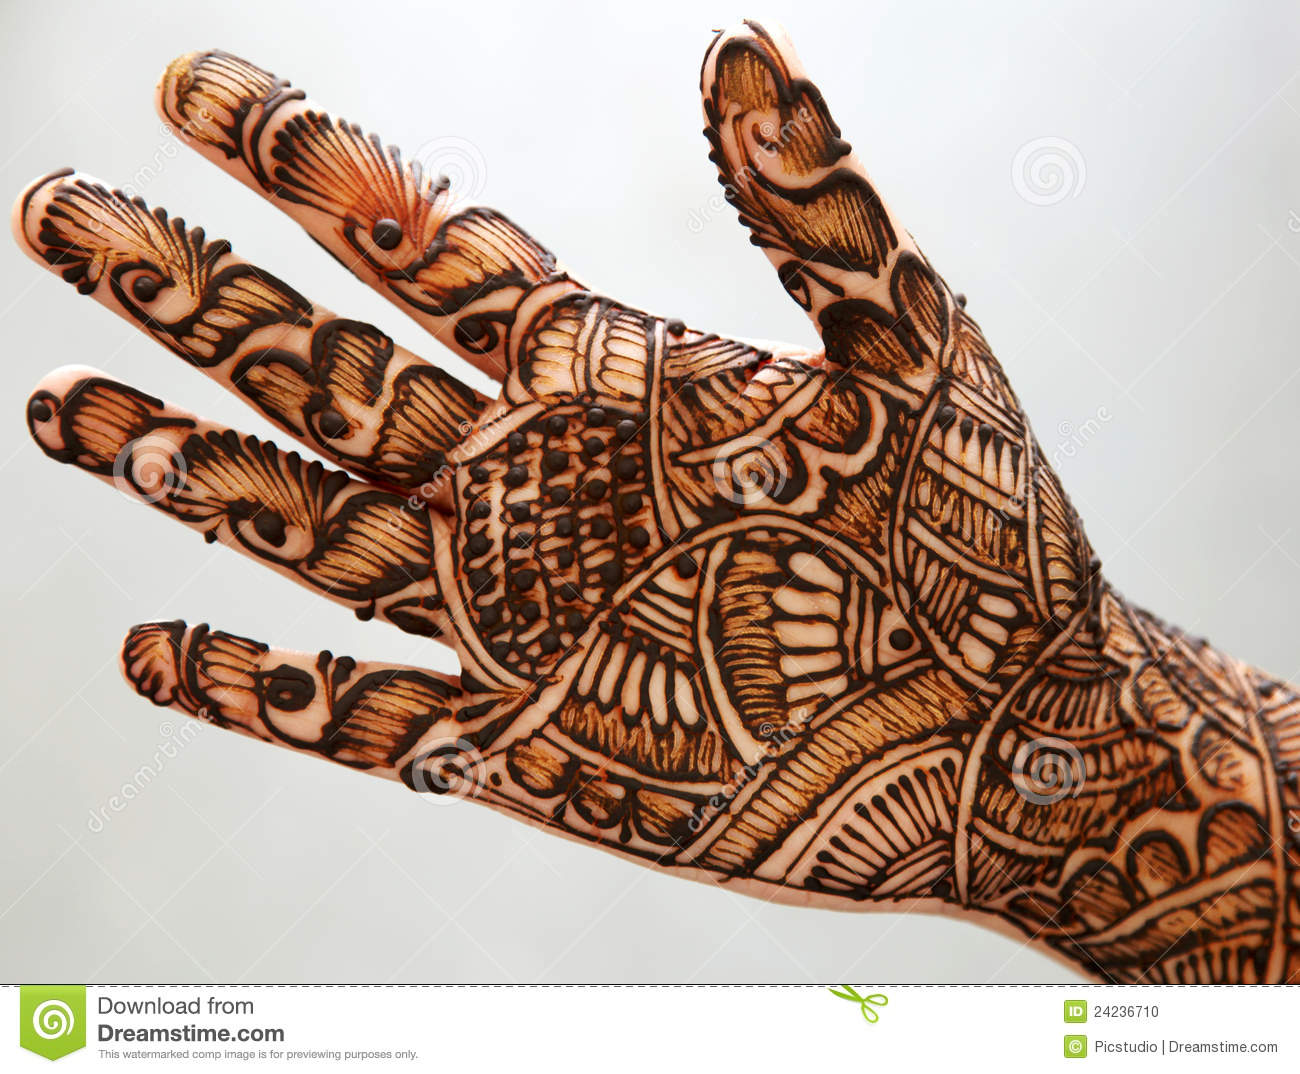 Free Download Indian Henna Designs Download Free Vector Graphic Hd    